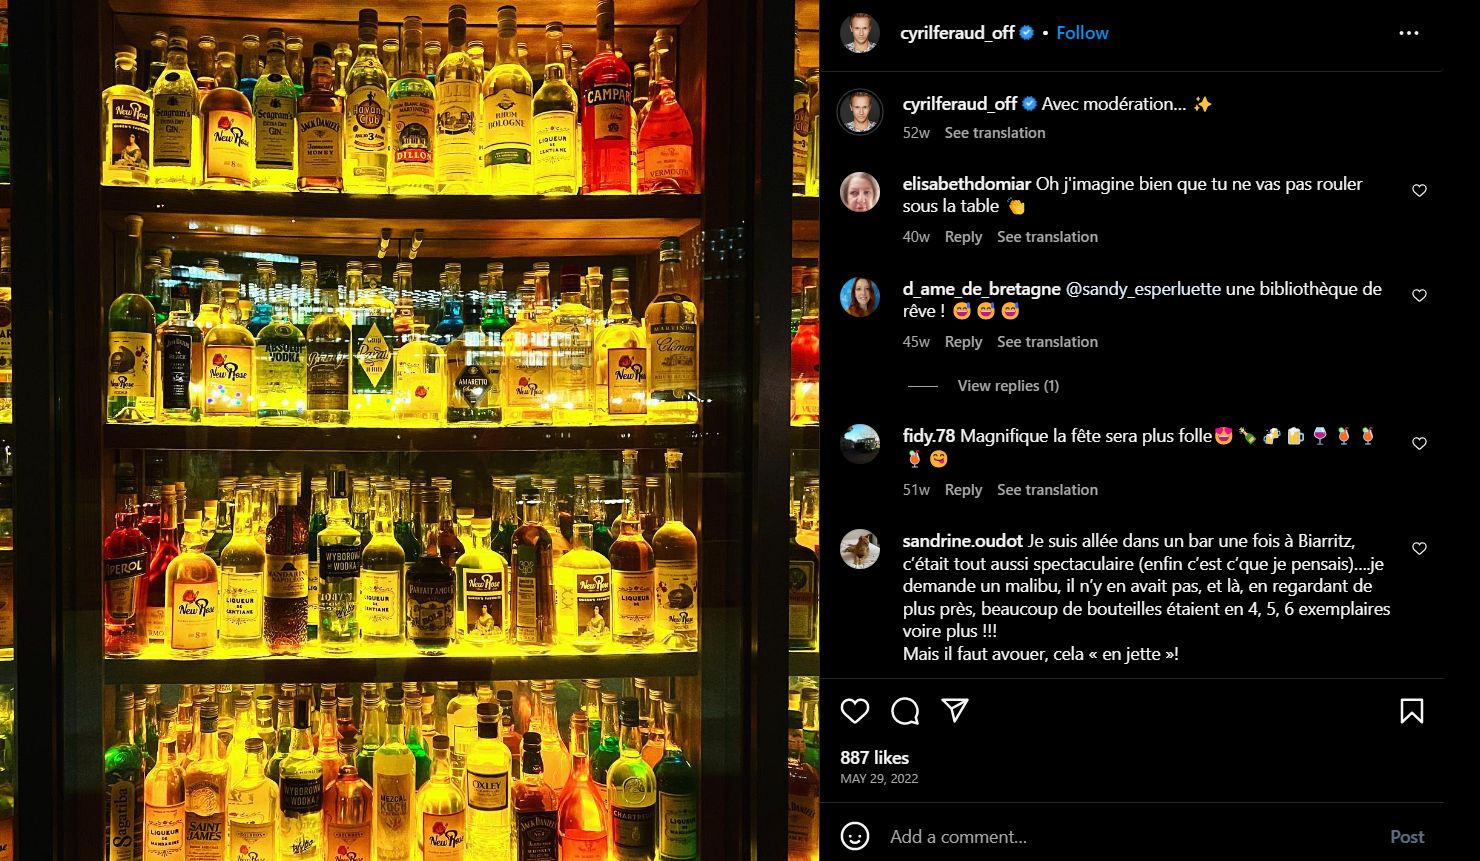 Cyril Féraud's Instagram post talking about consuming alcohol